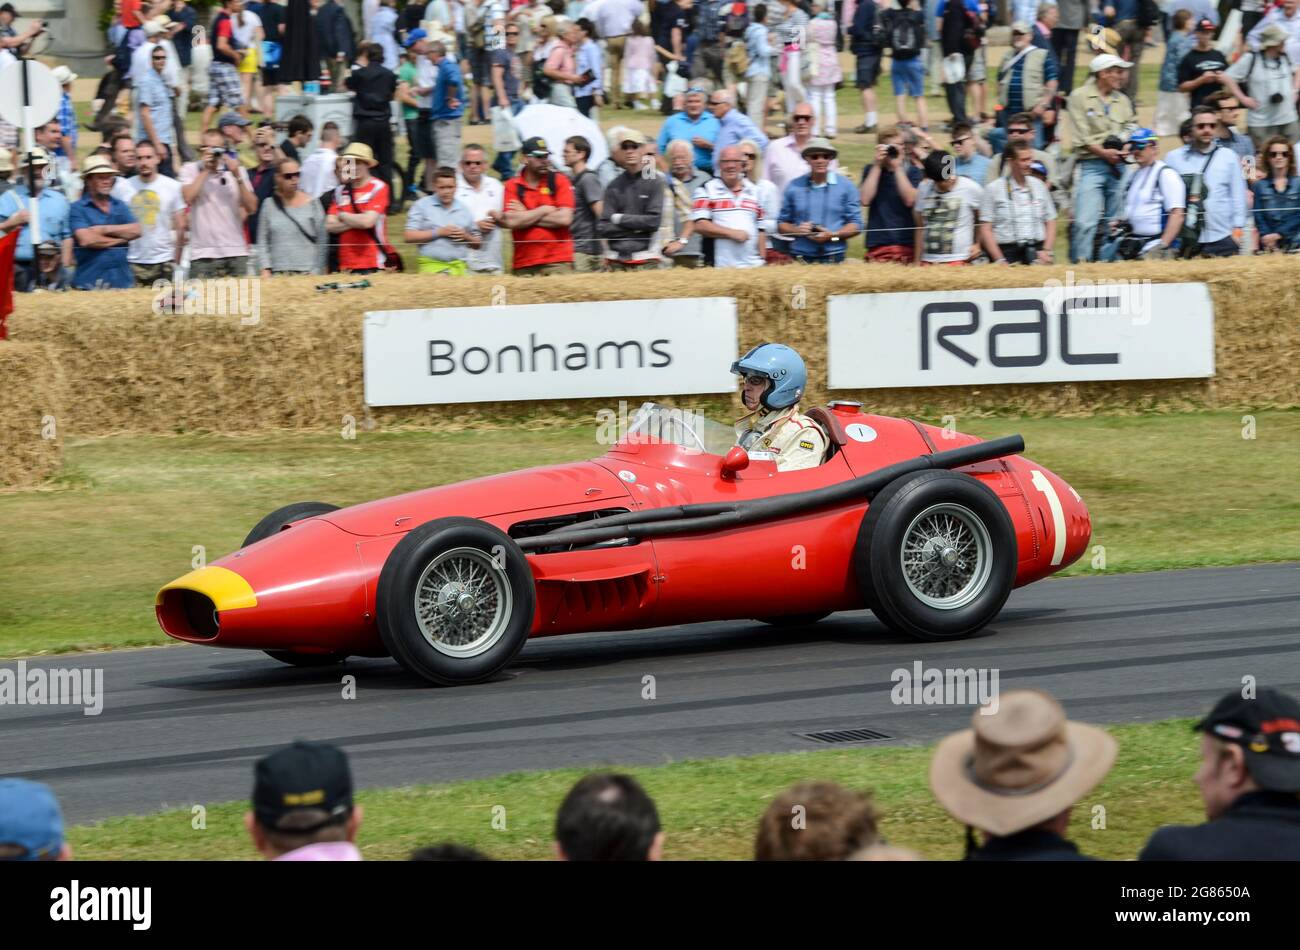 1957 Maserati 250F Lightweight racing up the hill climb at the Goodwood Festival of Speed 2013. Driven by Juan Manuel Fangio to win Formula 1 titles Stock Photo